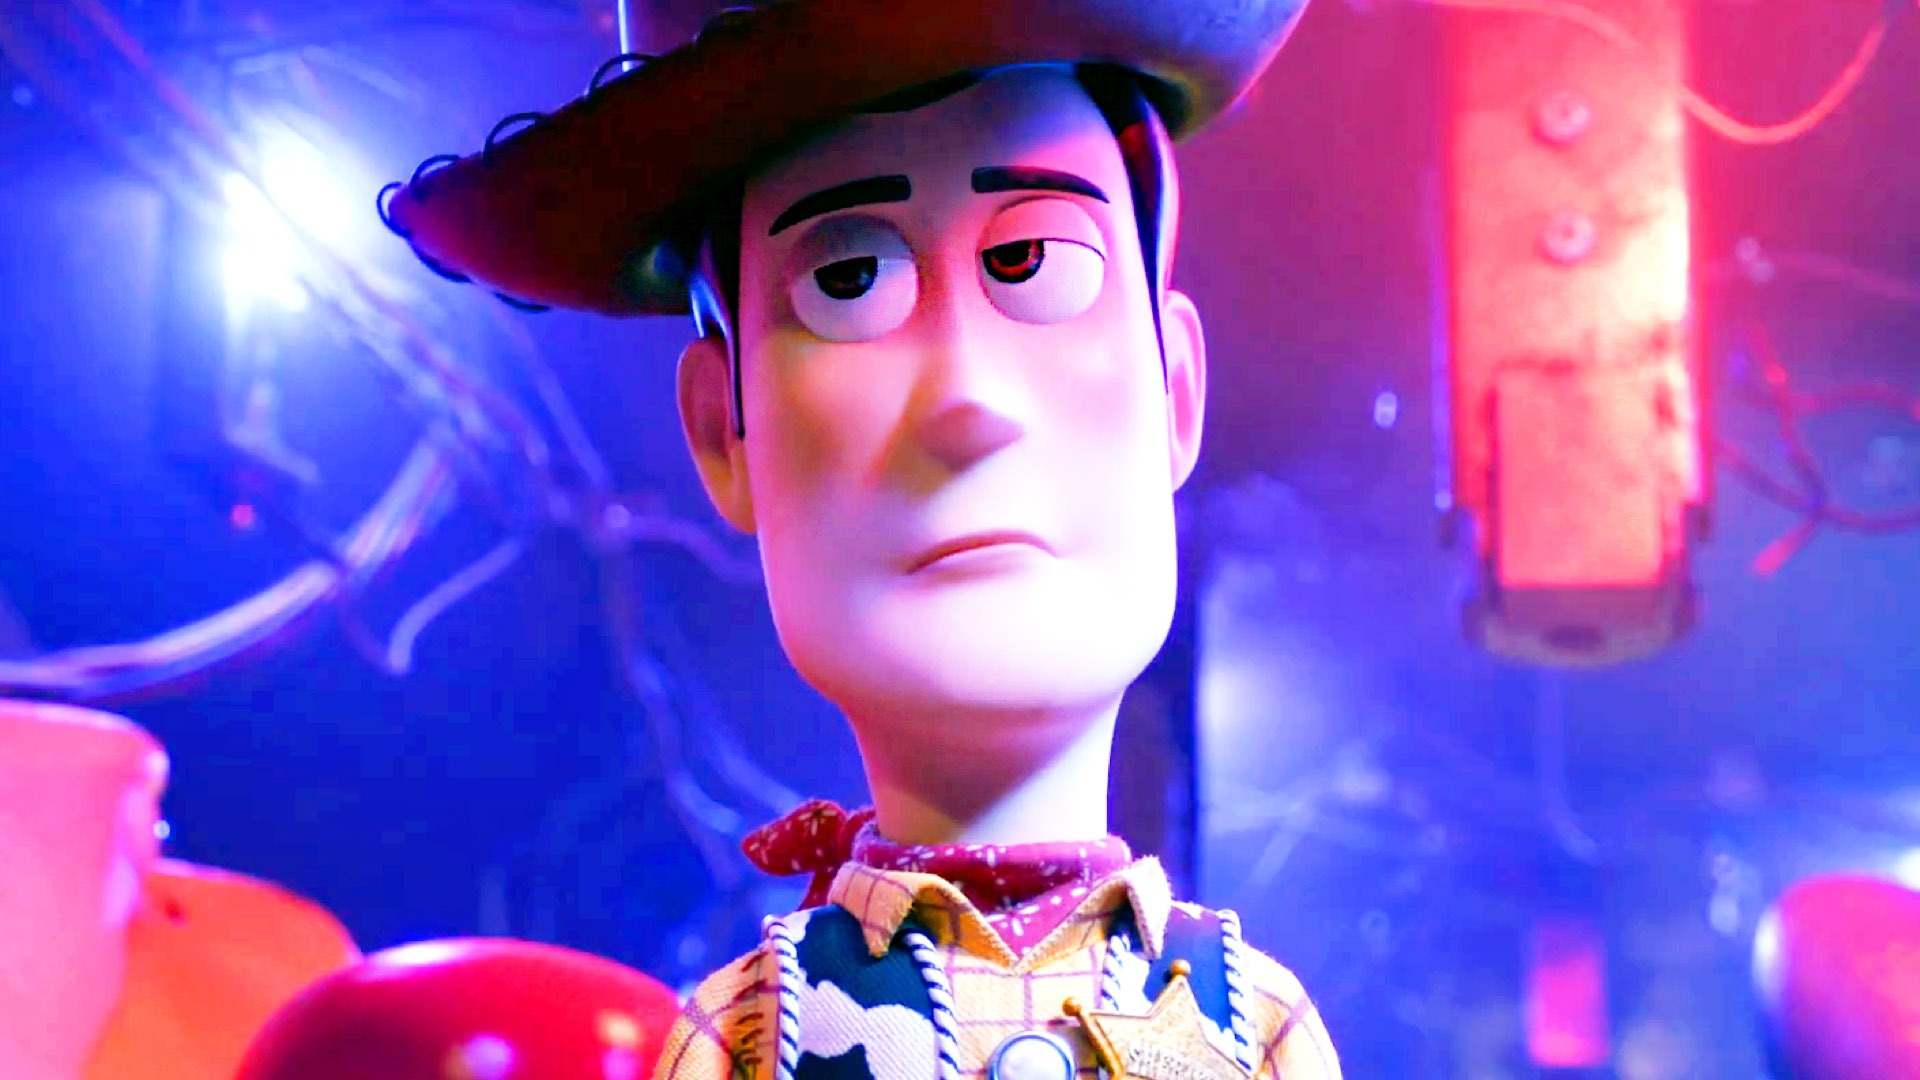 My rating of returning characters from toy story 4 : r/toystory